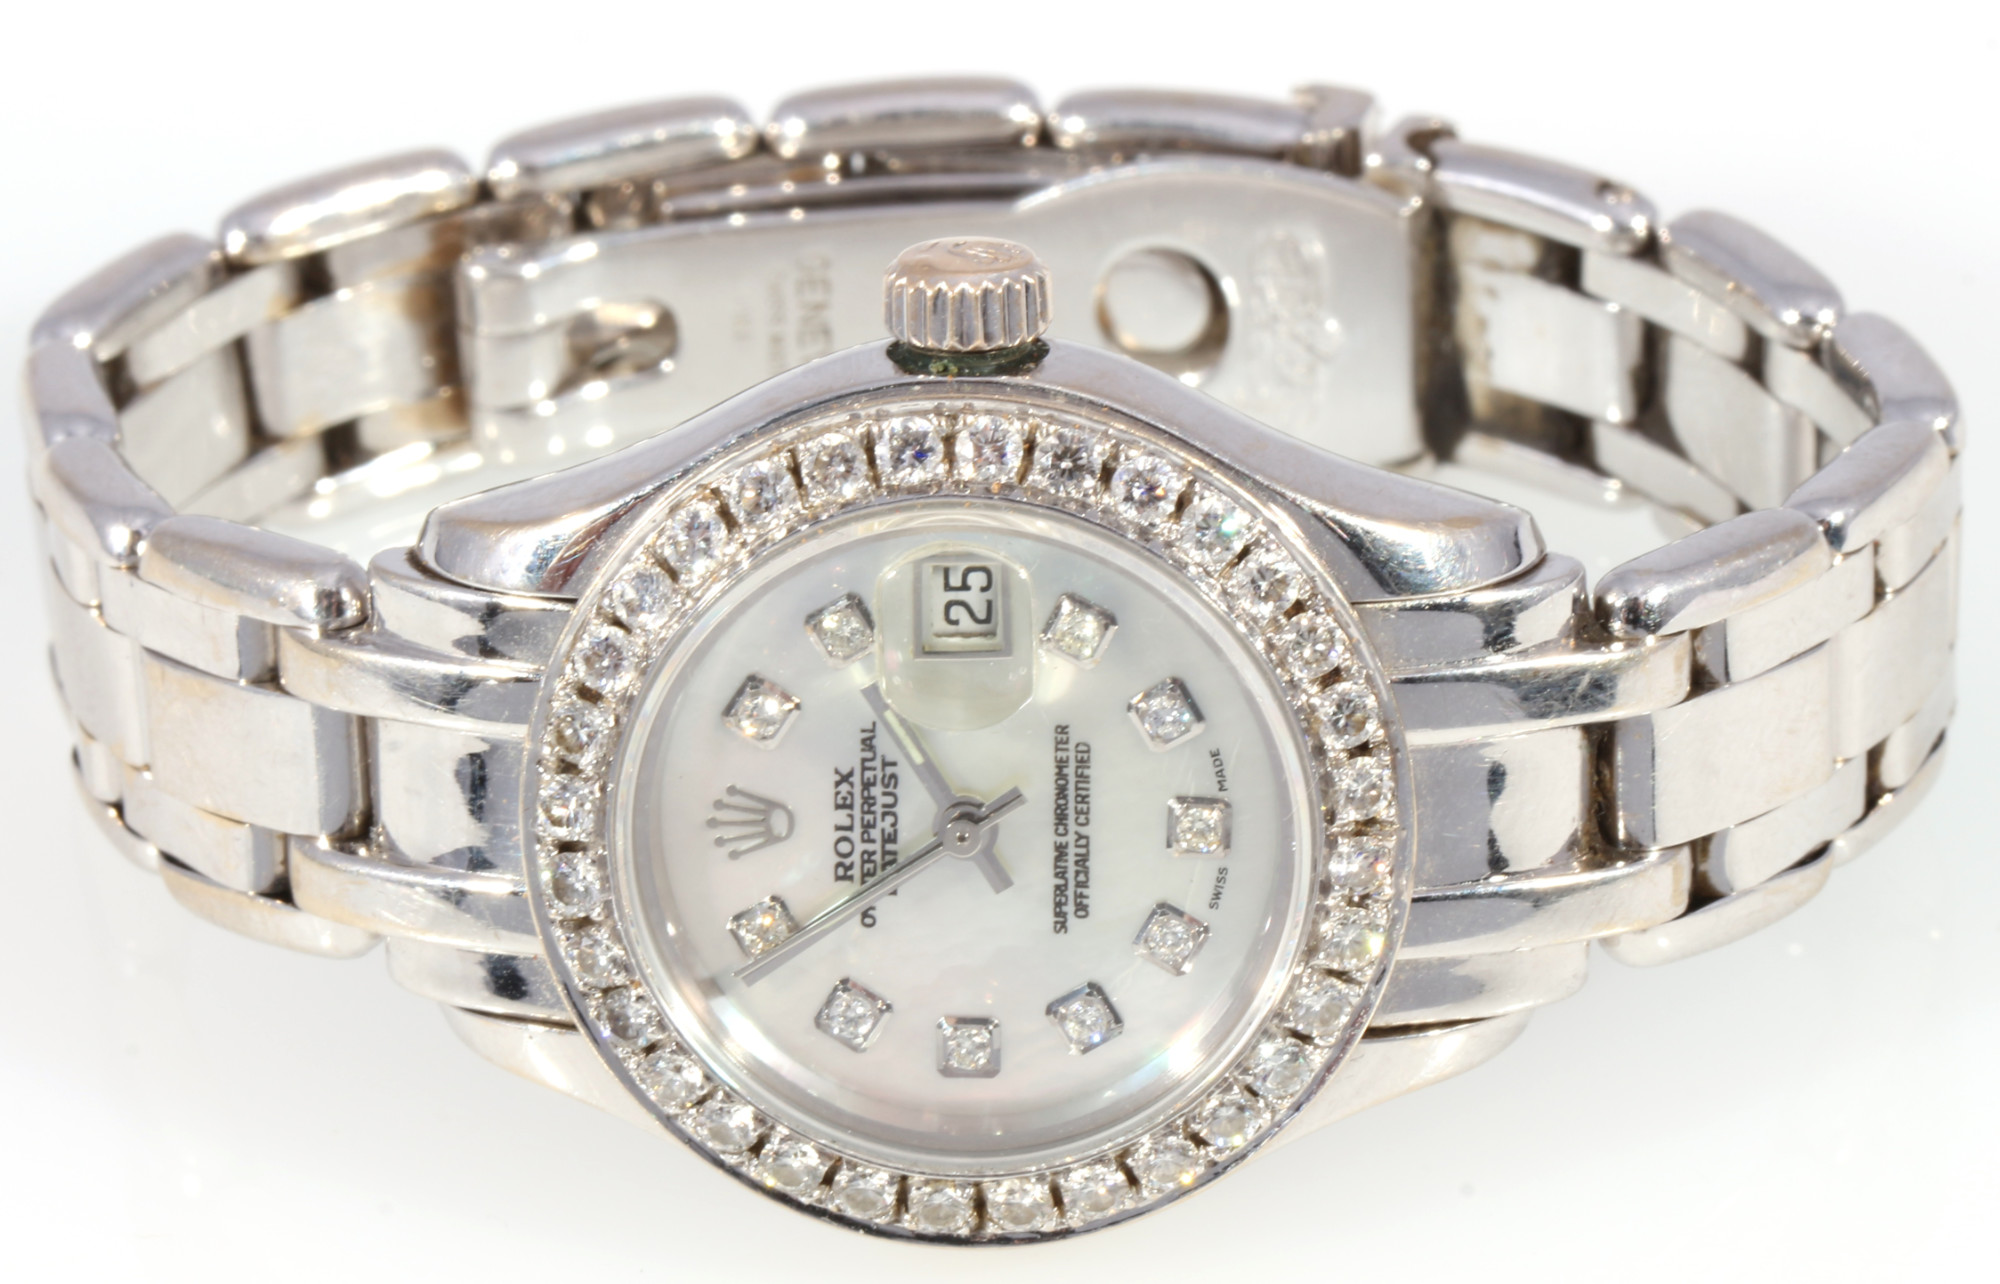 Rolex Oyster Perpetual DateJust 750 gold women's wrist watch with diamonds, 18K Gold Damenuhr mit Di - Image 3 of 6